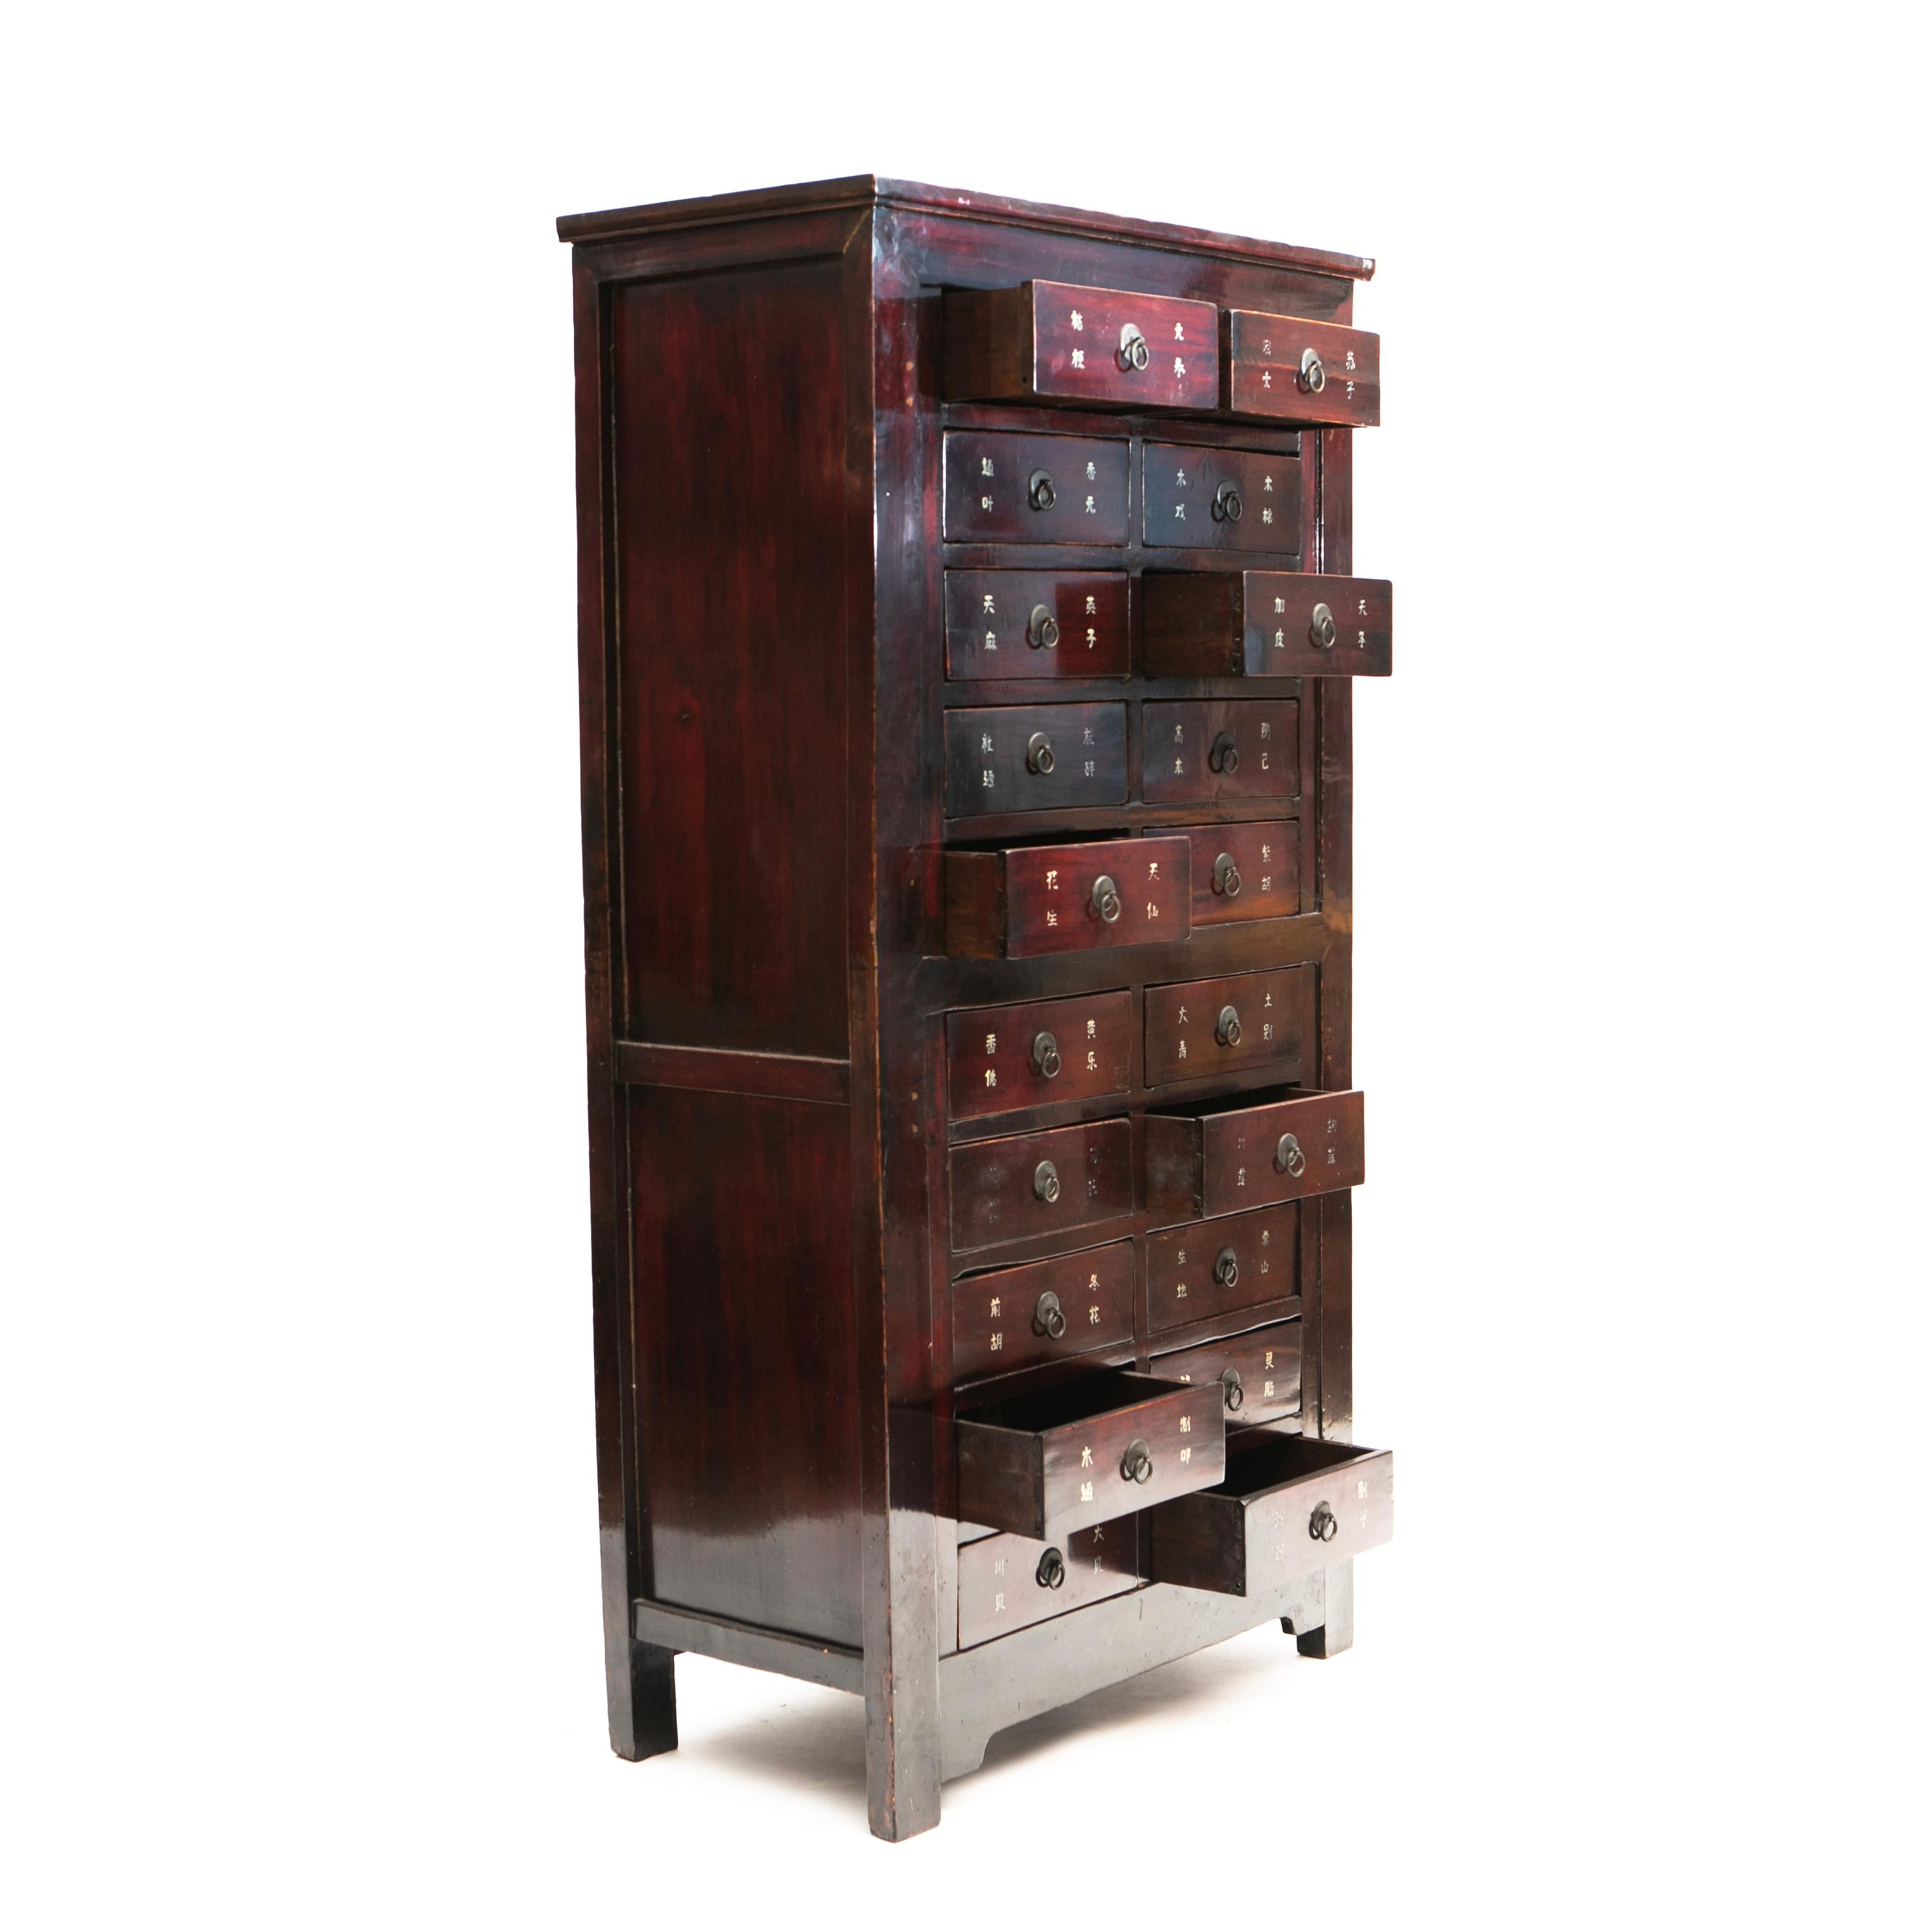 This elm wood apothecary cabinet, also known as a medicine chest, is an impressive piece of history with 20 unique drawers. The original burgundy lacquer has developed a beautiful natural patina over the years.
Each drawer is intricately detailed